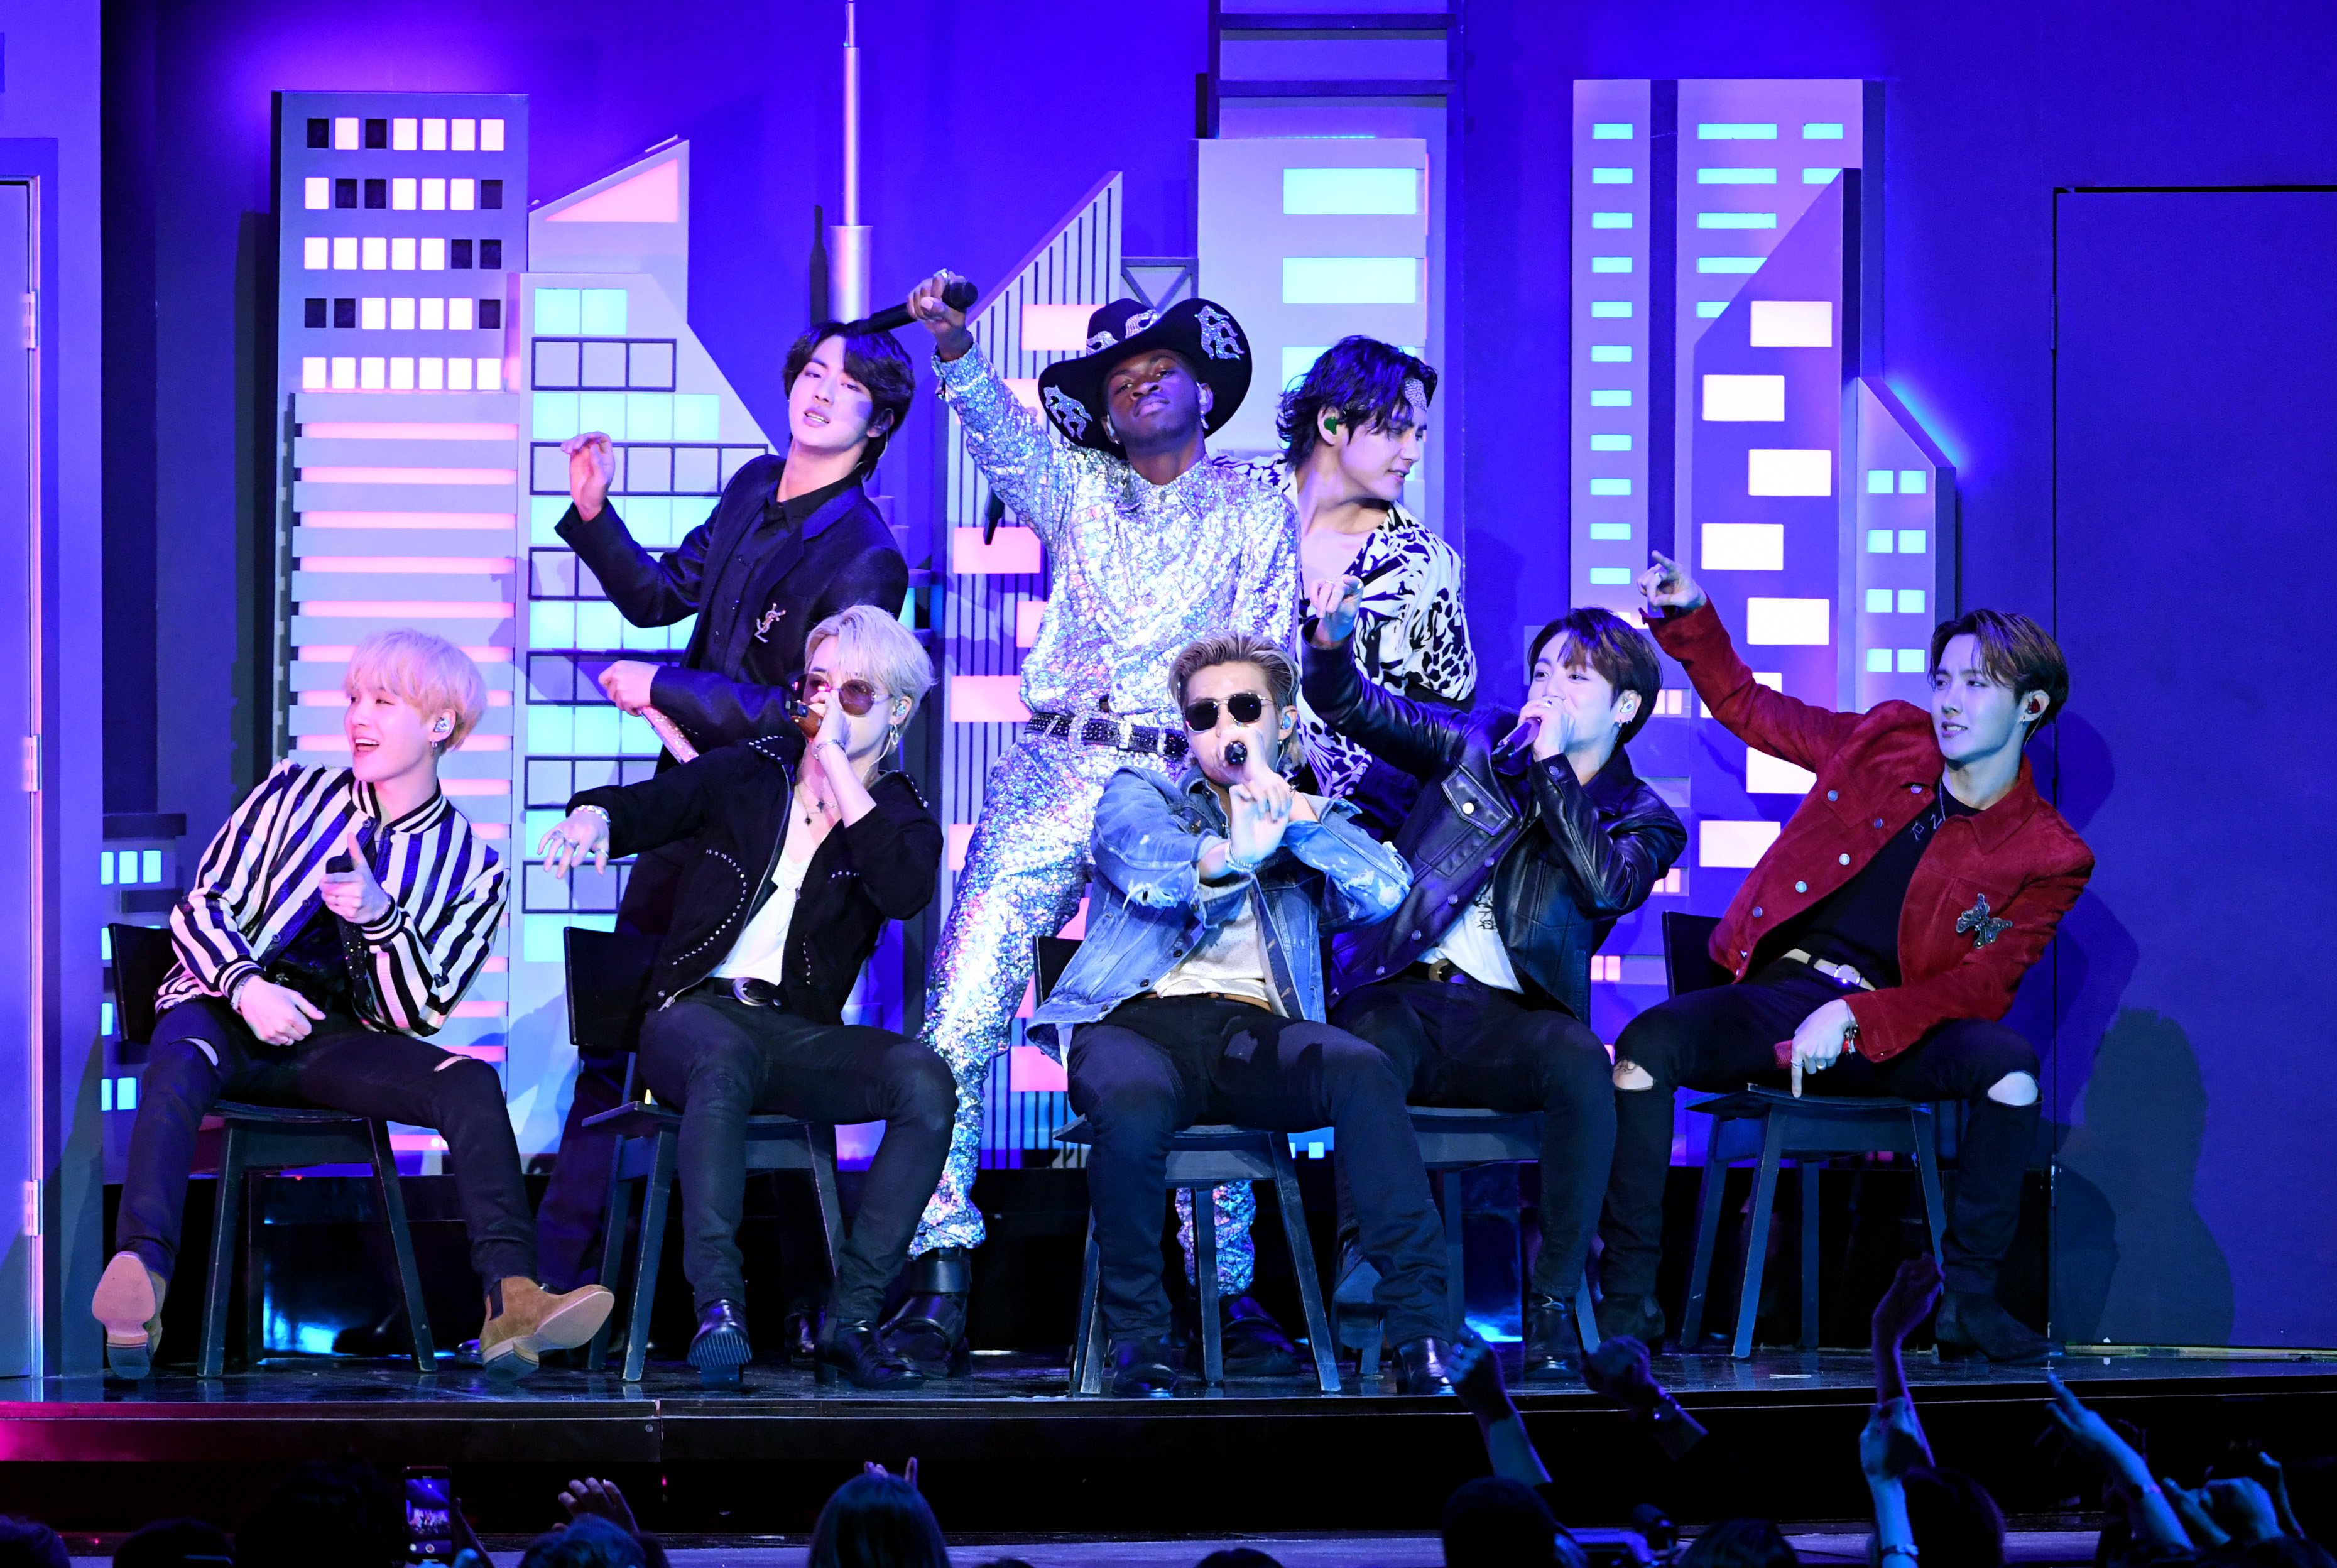 Lil Nas X and BTS perform on stage during the 62nd Annual Grammy Awards